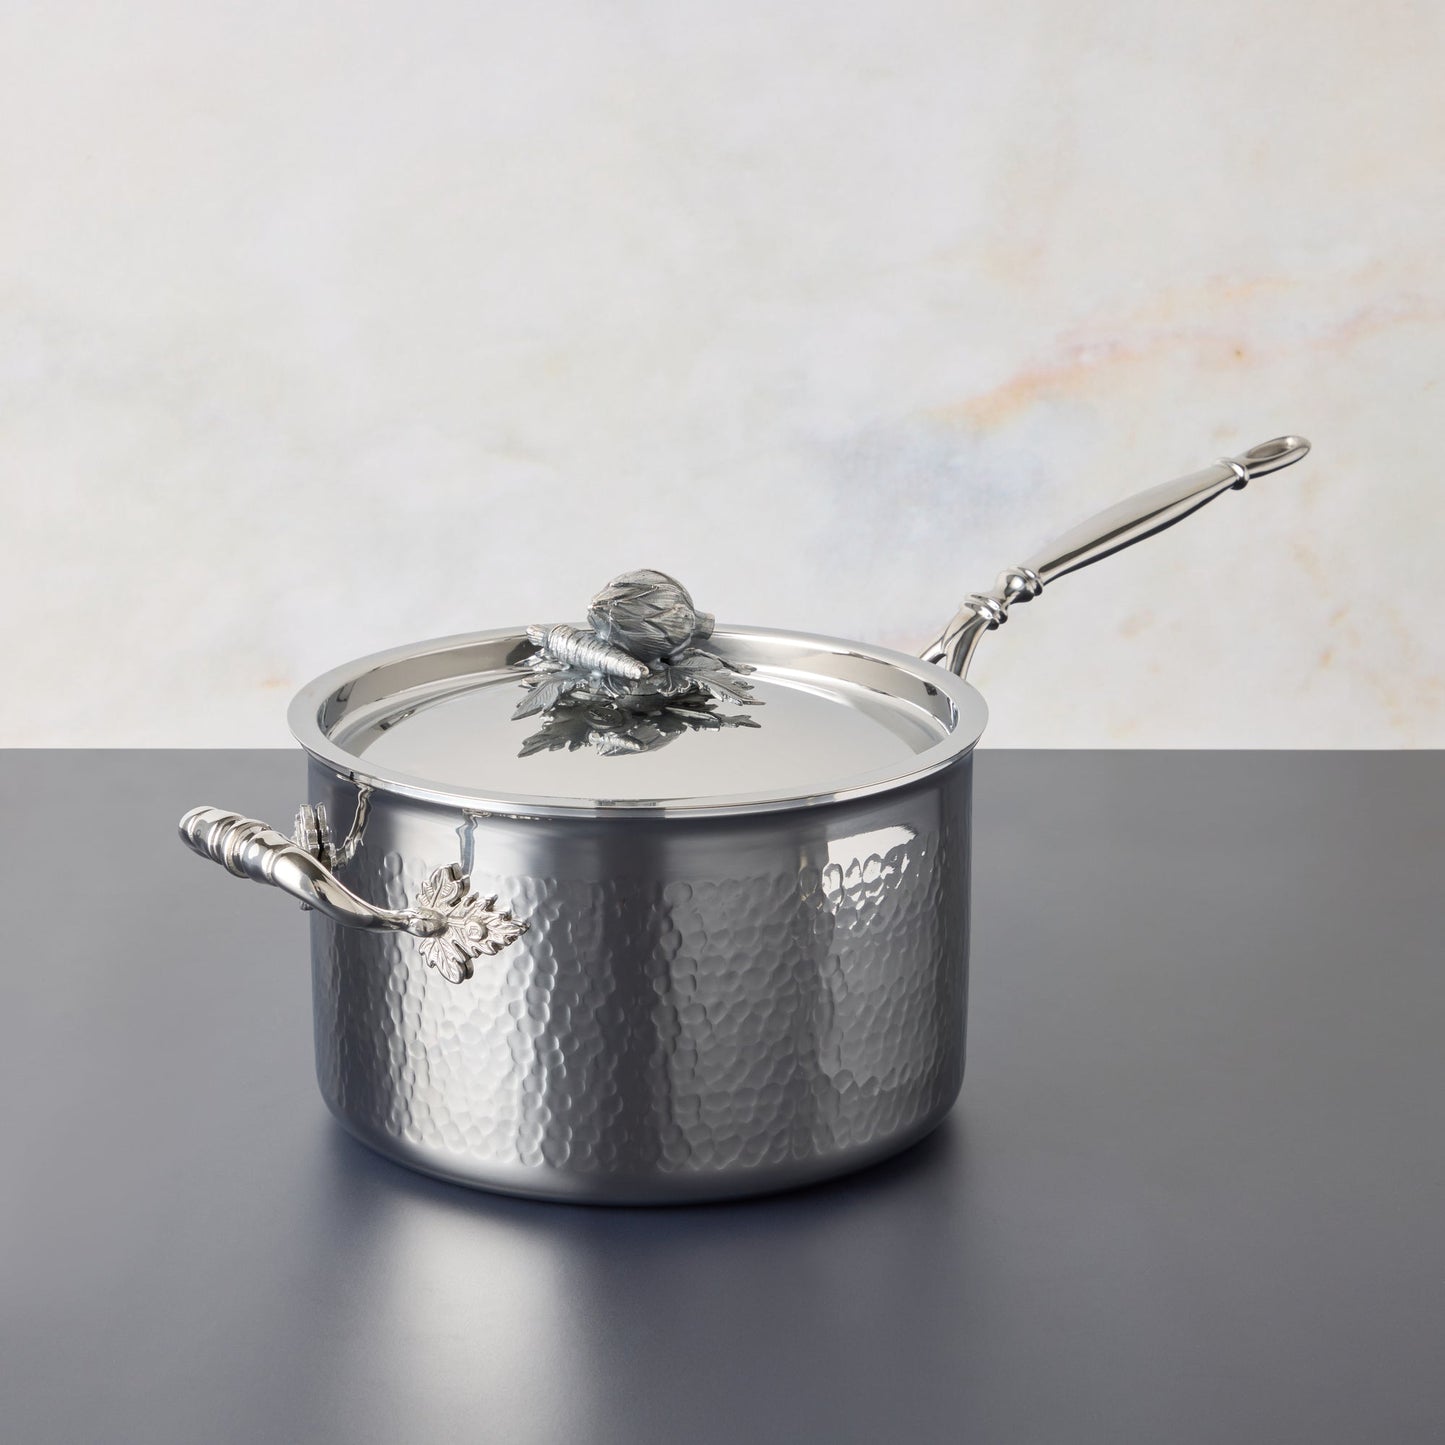 Opus Prima hammered clad stainless steel 4 Qt  saucepan with decorated silver-plated lid knob finial from Ruffoni